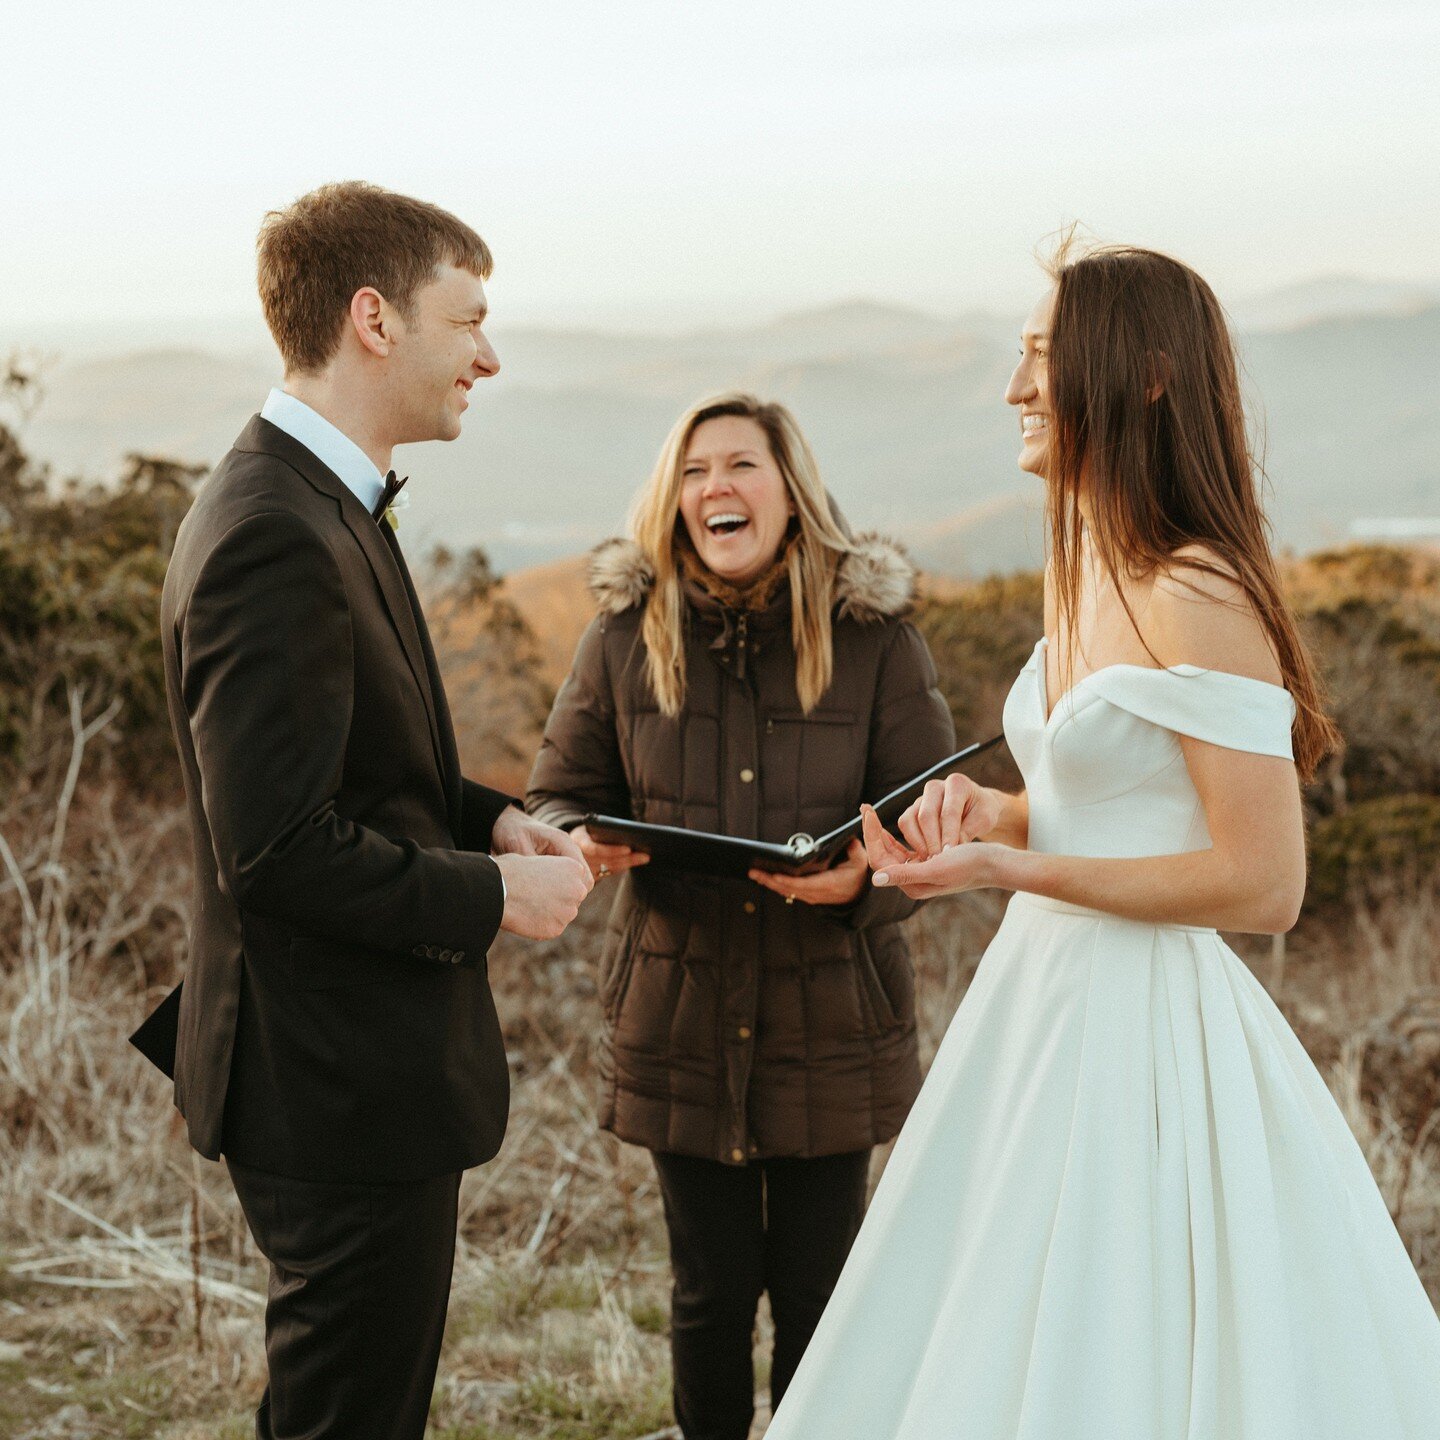 April &amp; Brian had a beautiful sunrise elopement and @brianaautran &amp; @matthewglennphoto captured their love so perfectly! 

We did a hand-fasting ceremony and literally tied the knot! 😂

You can really see the love they share for one another 